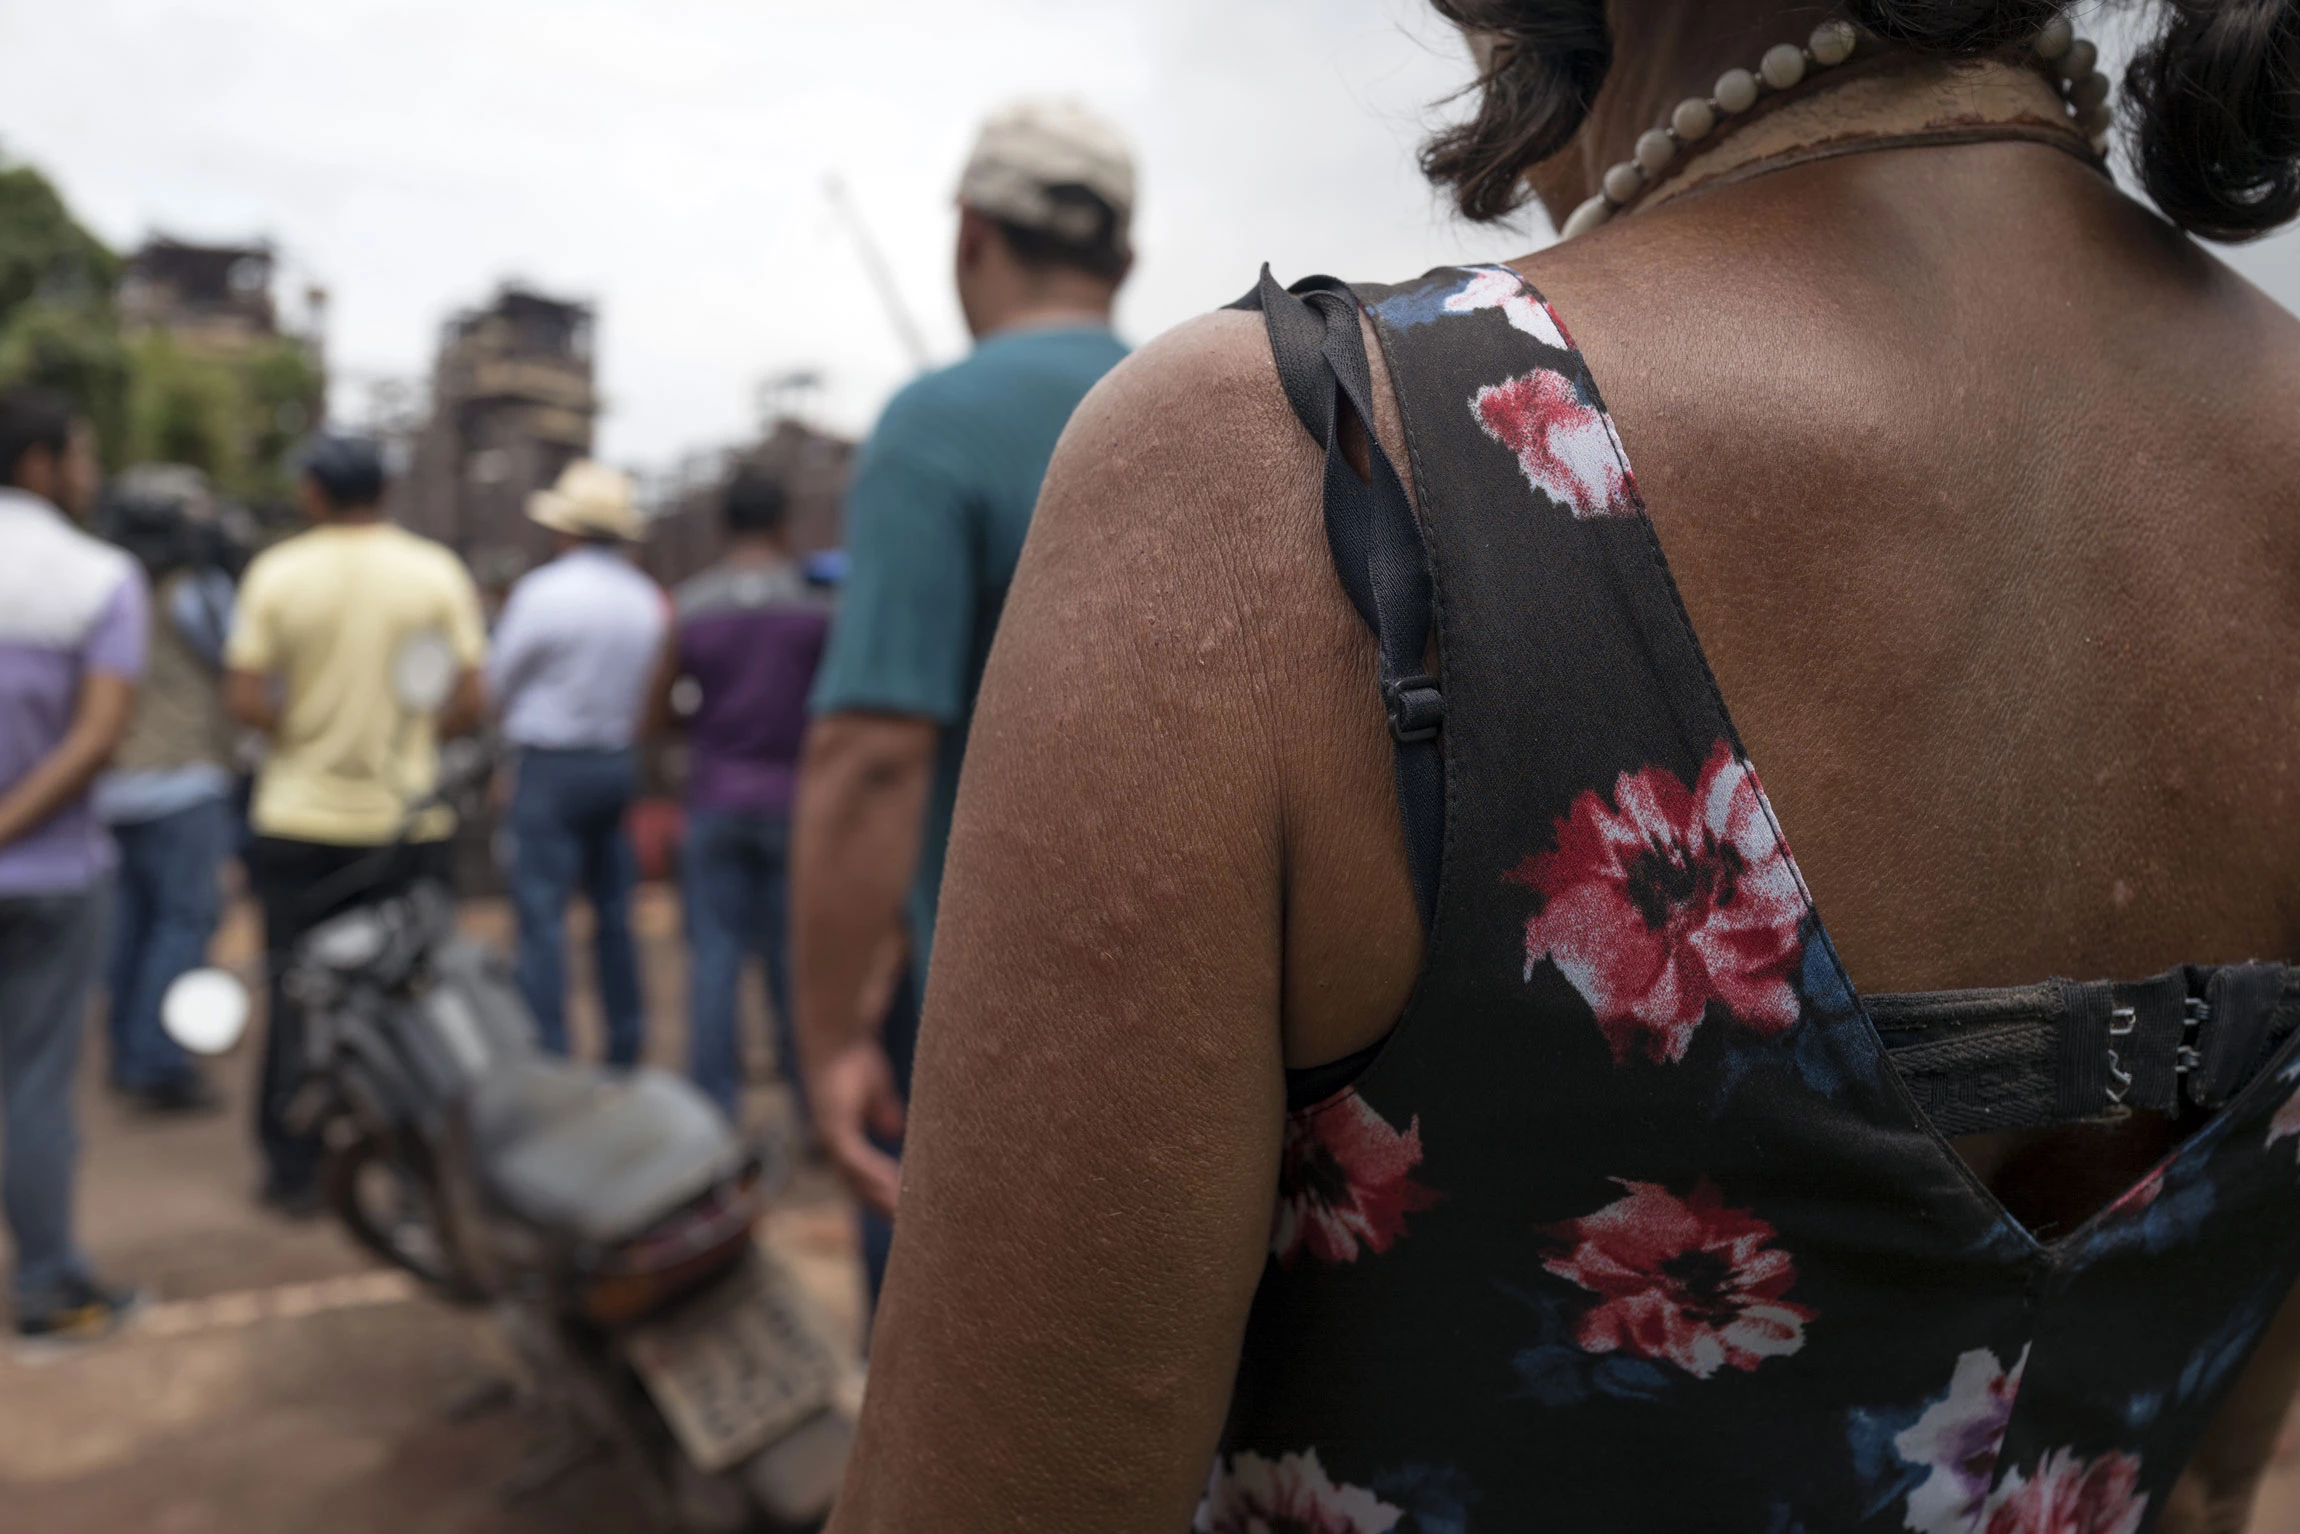 A demonstrator, with a rash on her body allegedly caused from contaminated water, stands during a protest against Norsk Hydro ASA discharging untreated water into a nearby river in front of the company's alumina refinery in Barcarena, Para state, Brazil, on Wednesday, Feb. 28, 2018. A Brazilian judge ordered Norsk Hydro ASA to pay for residents to be tested for health problems related to possible contamination caused by leakage from the company's Amazonian alumina operations, court documents show. Photographer: Alessandro Falco/Bloomberg via Getty Images